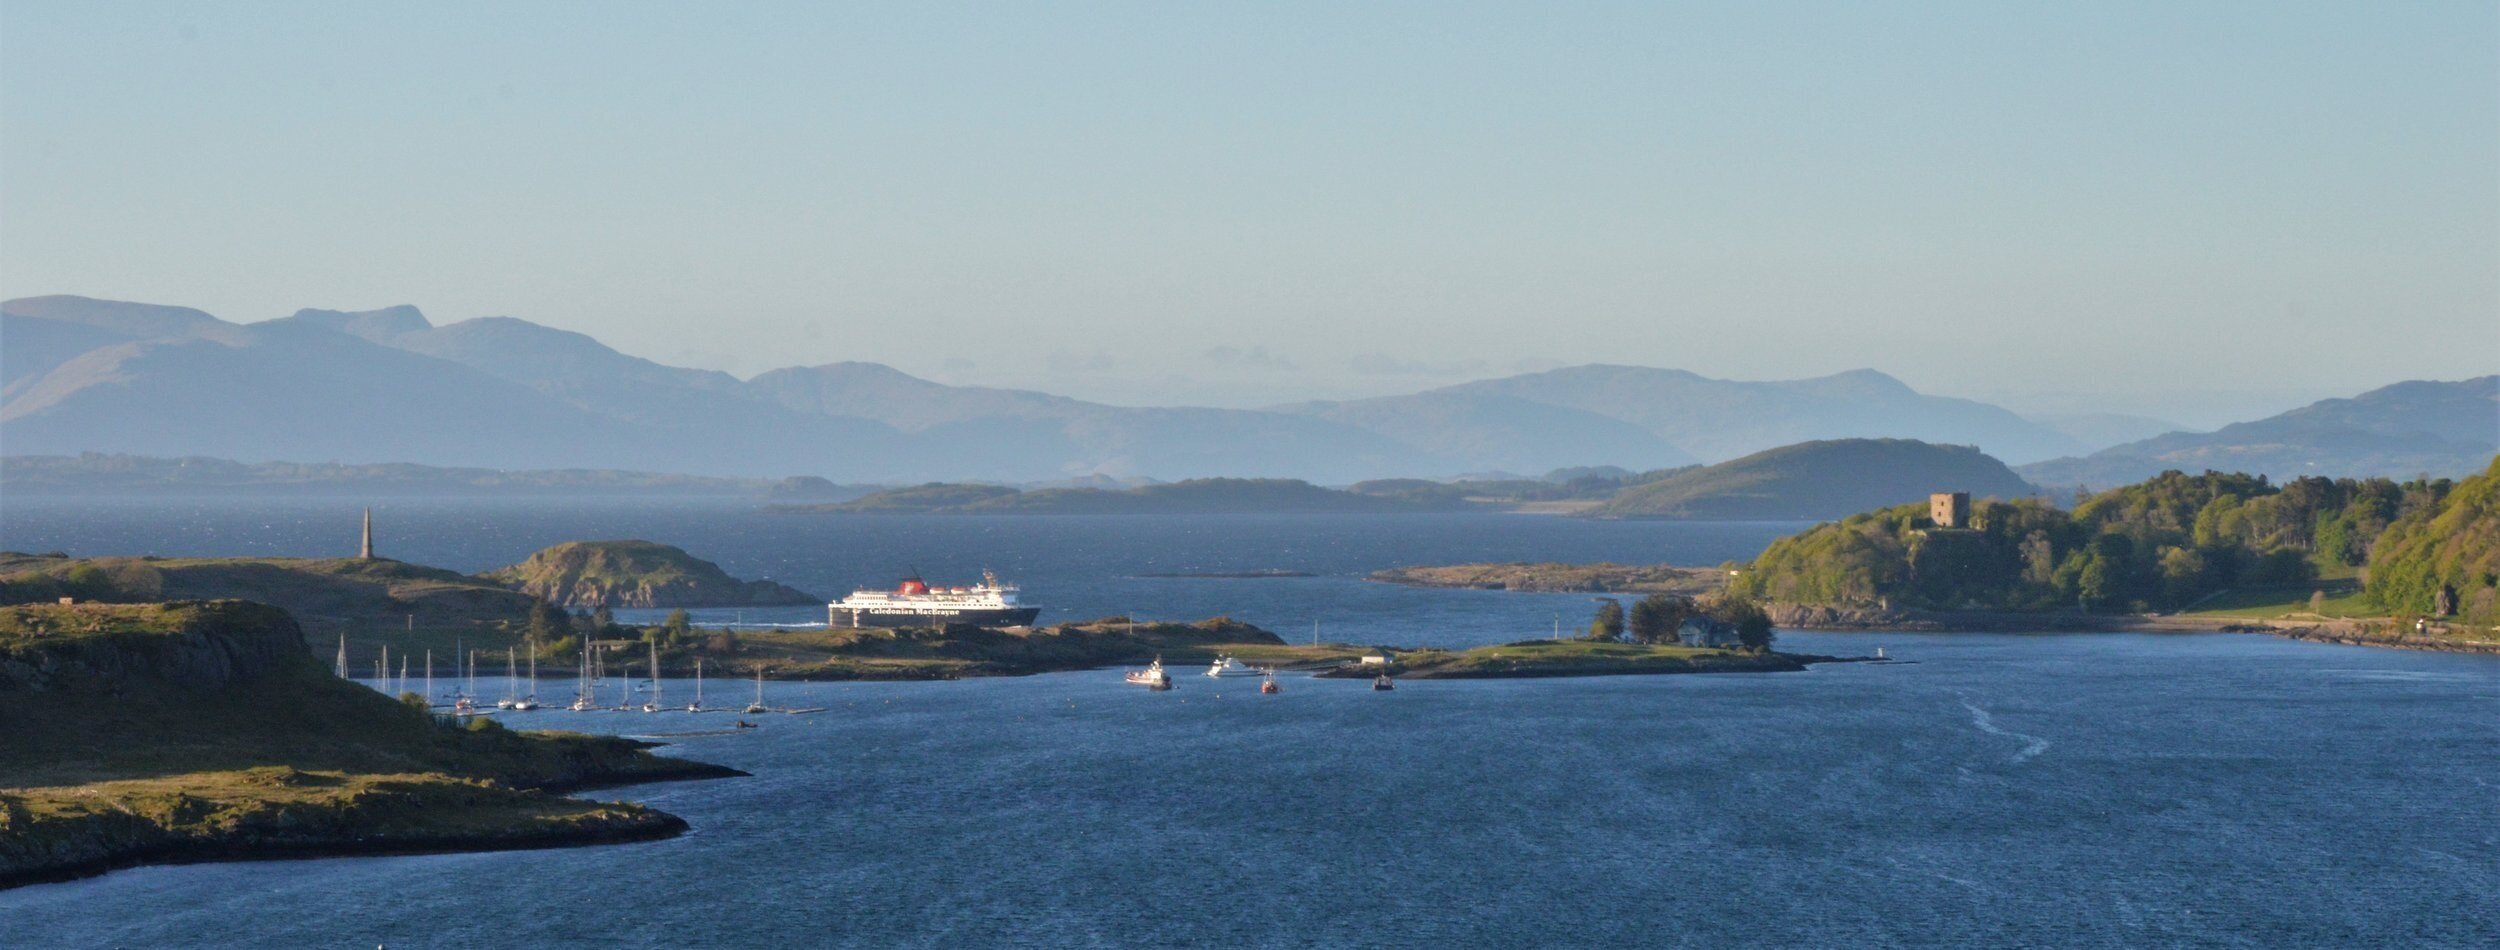 The Ferry Coming Into Oban